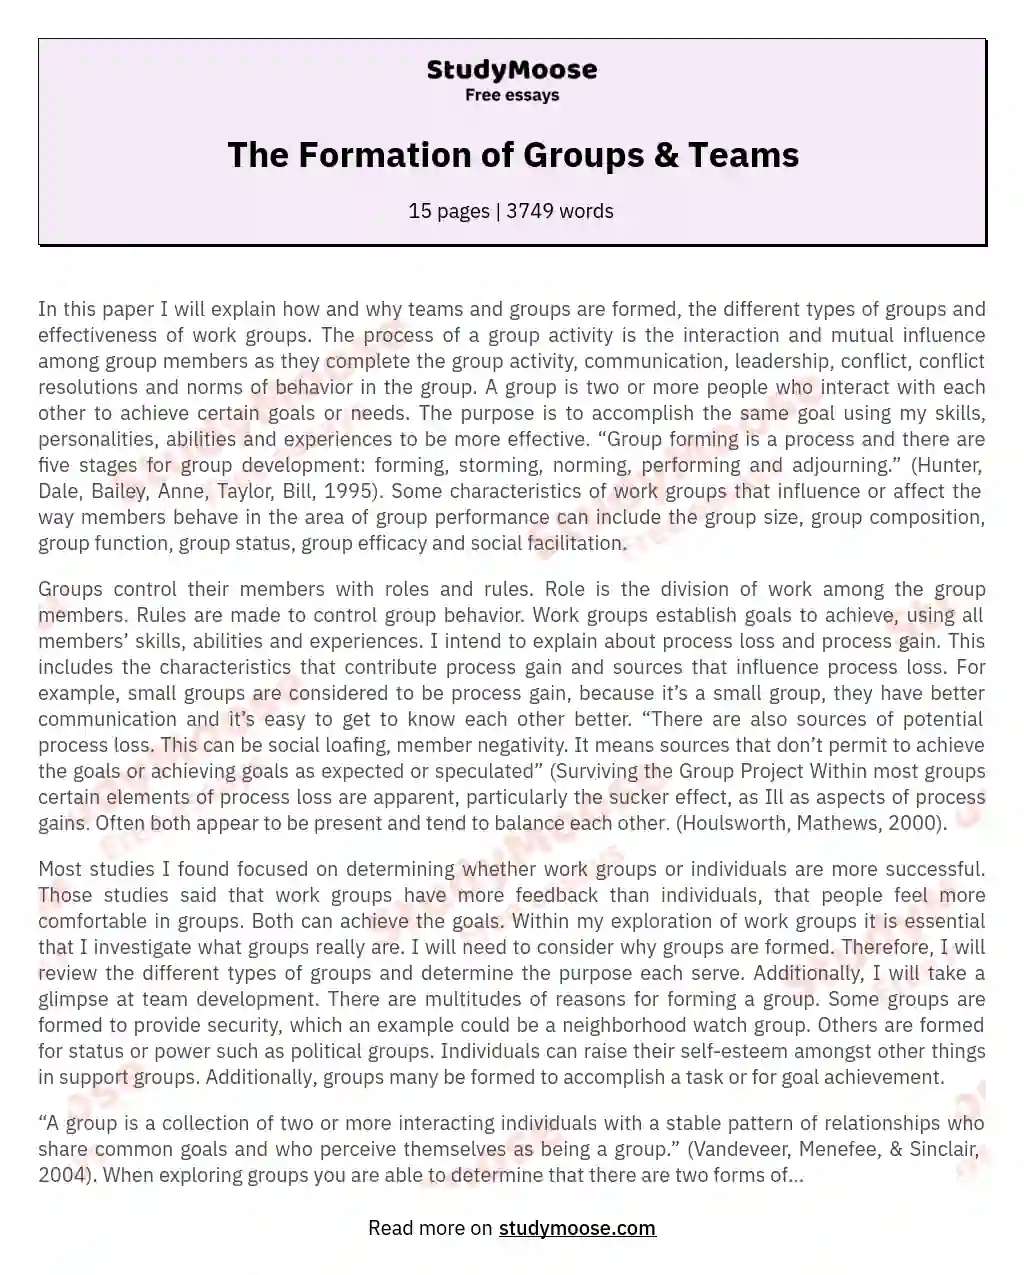 The Formation of Groups & Teams